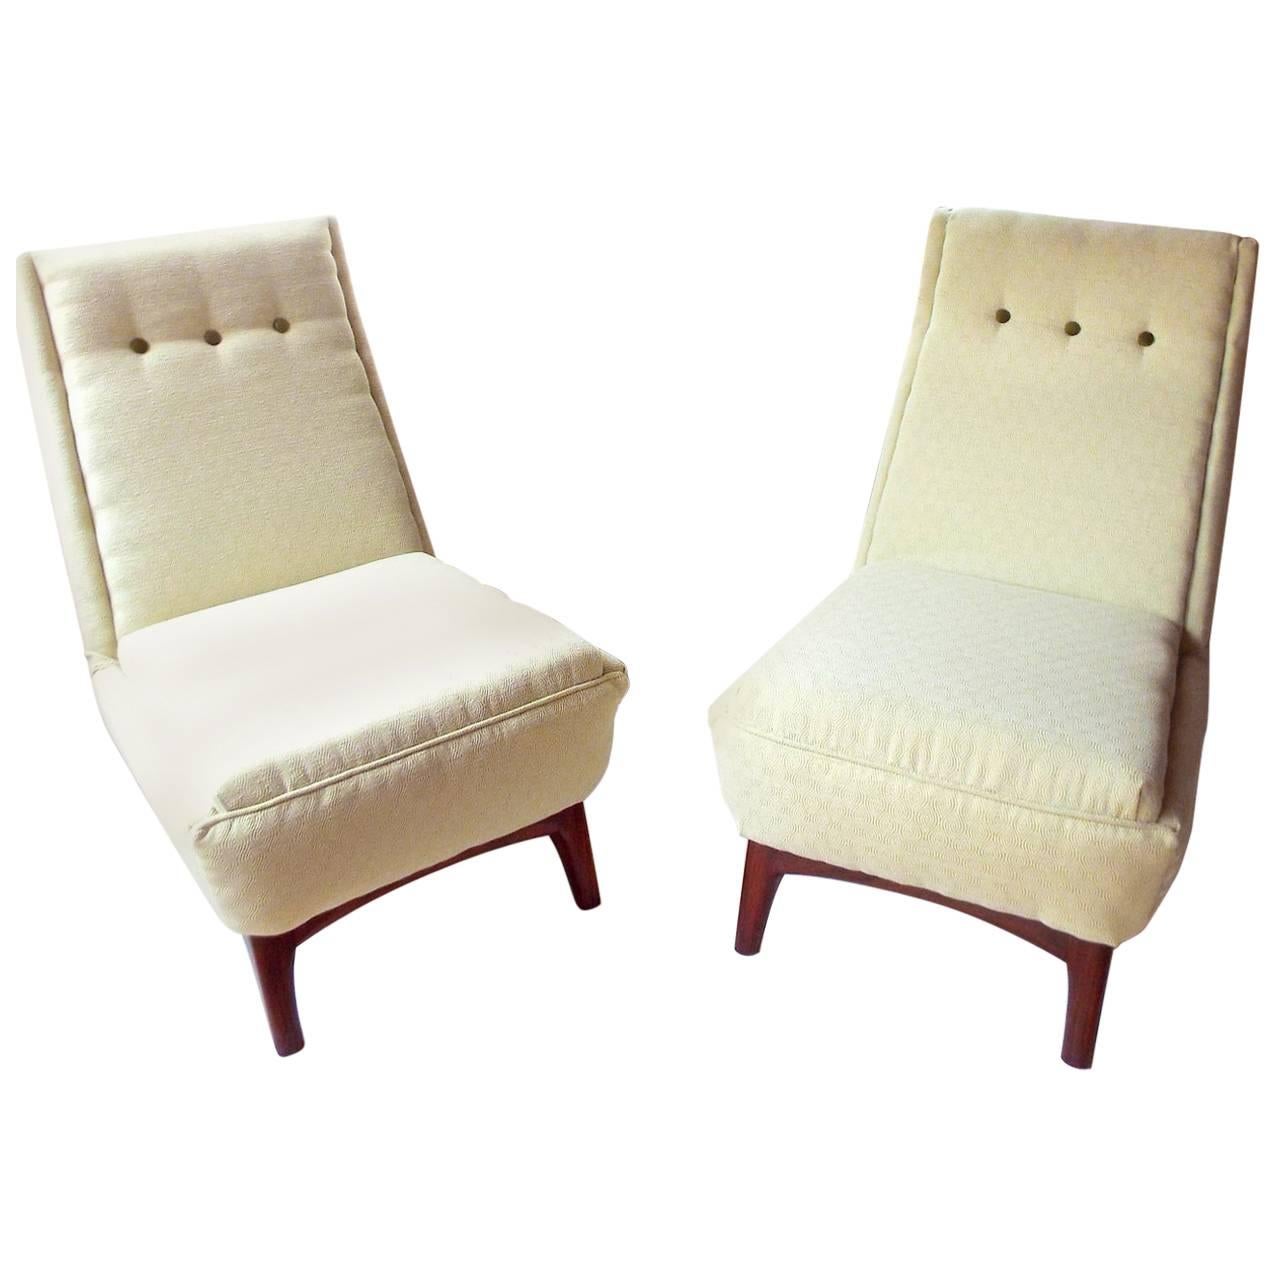 Pair of Rare Greaves & Thomas 1960s Lounge Chairs, Fully Reupholstered For Sale